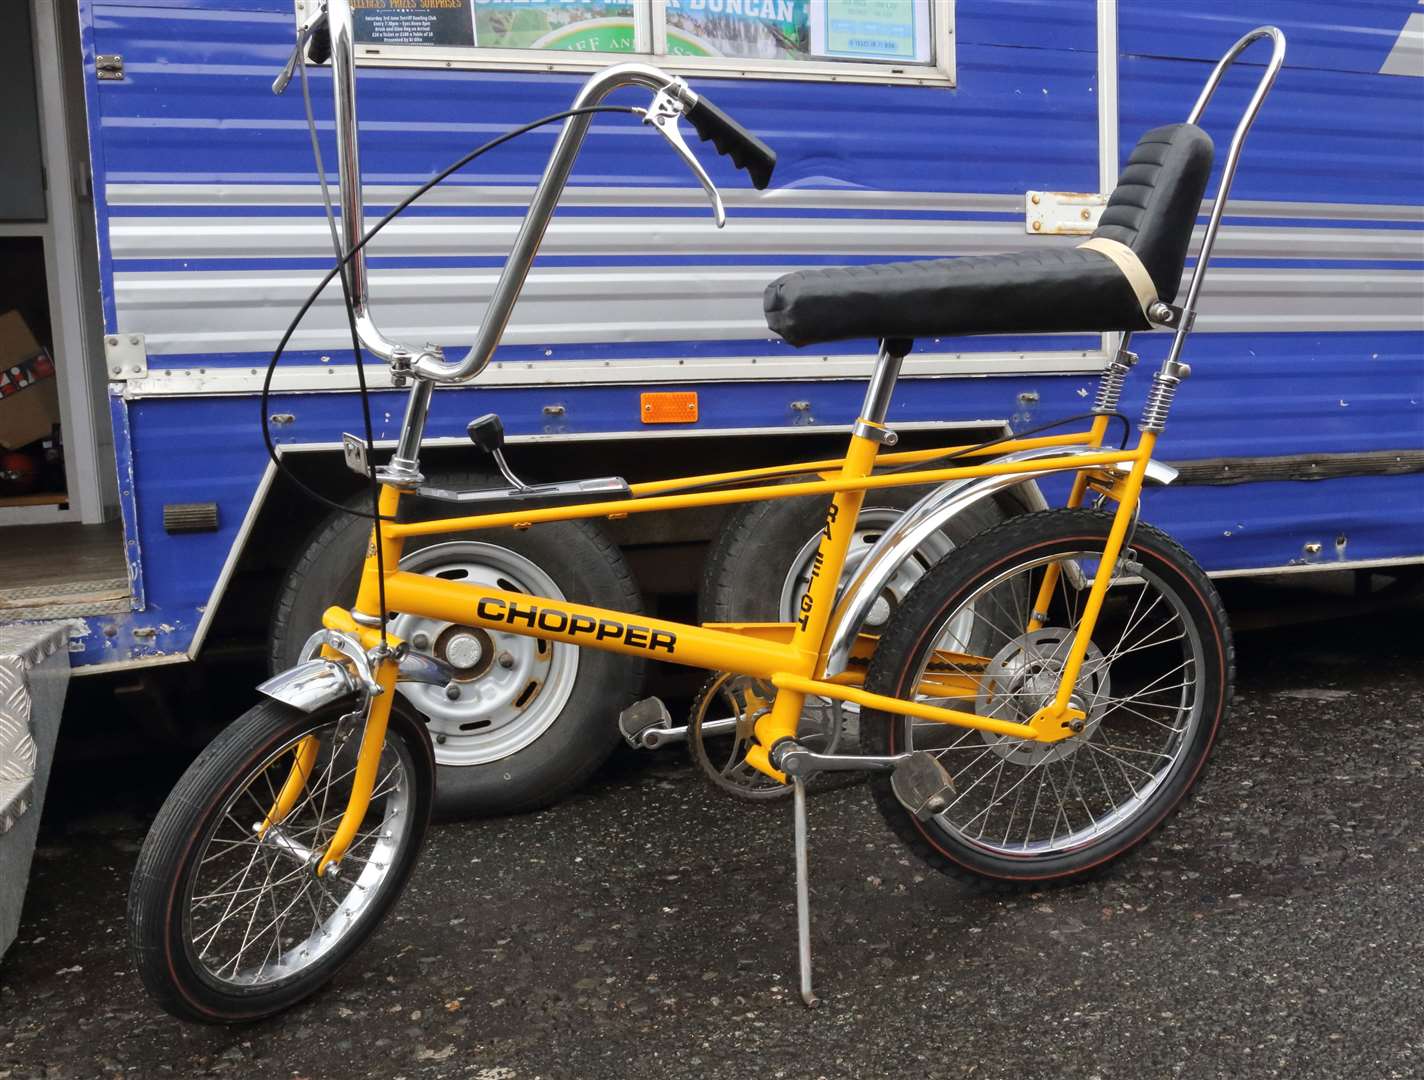 The original 1972 Chopper is up for grabs from TDVCC this summer.